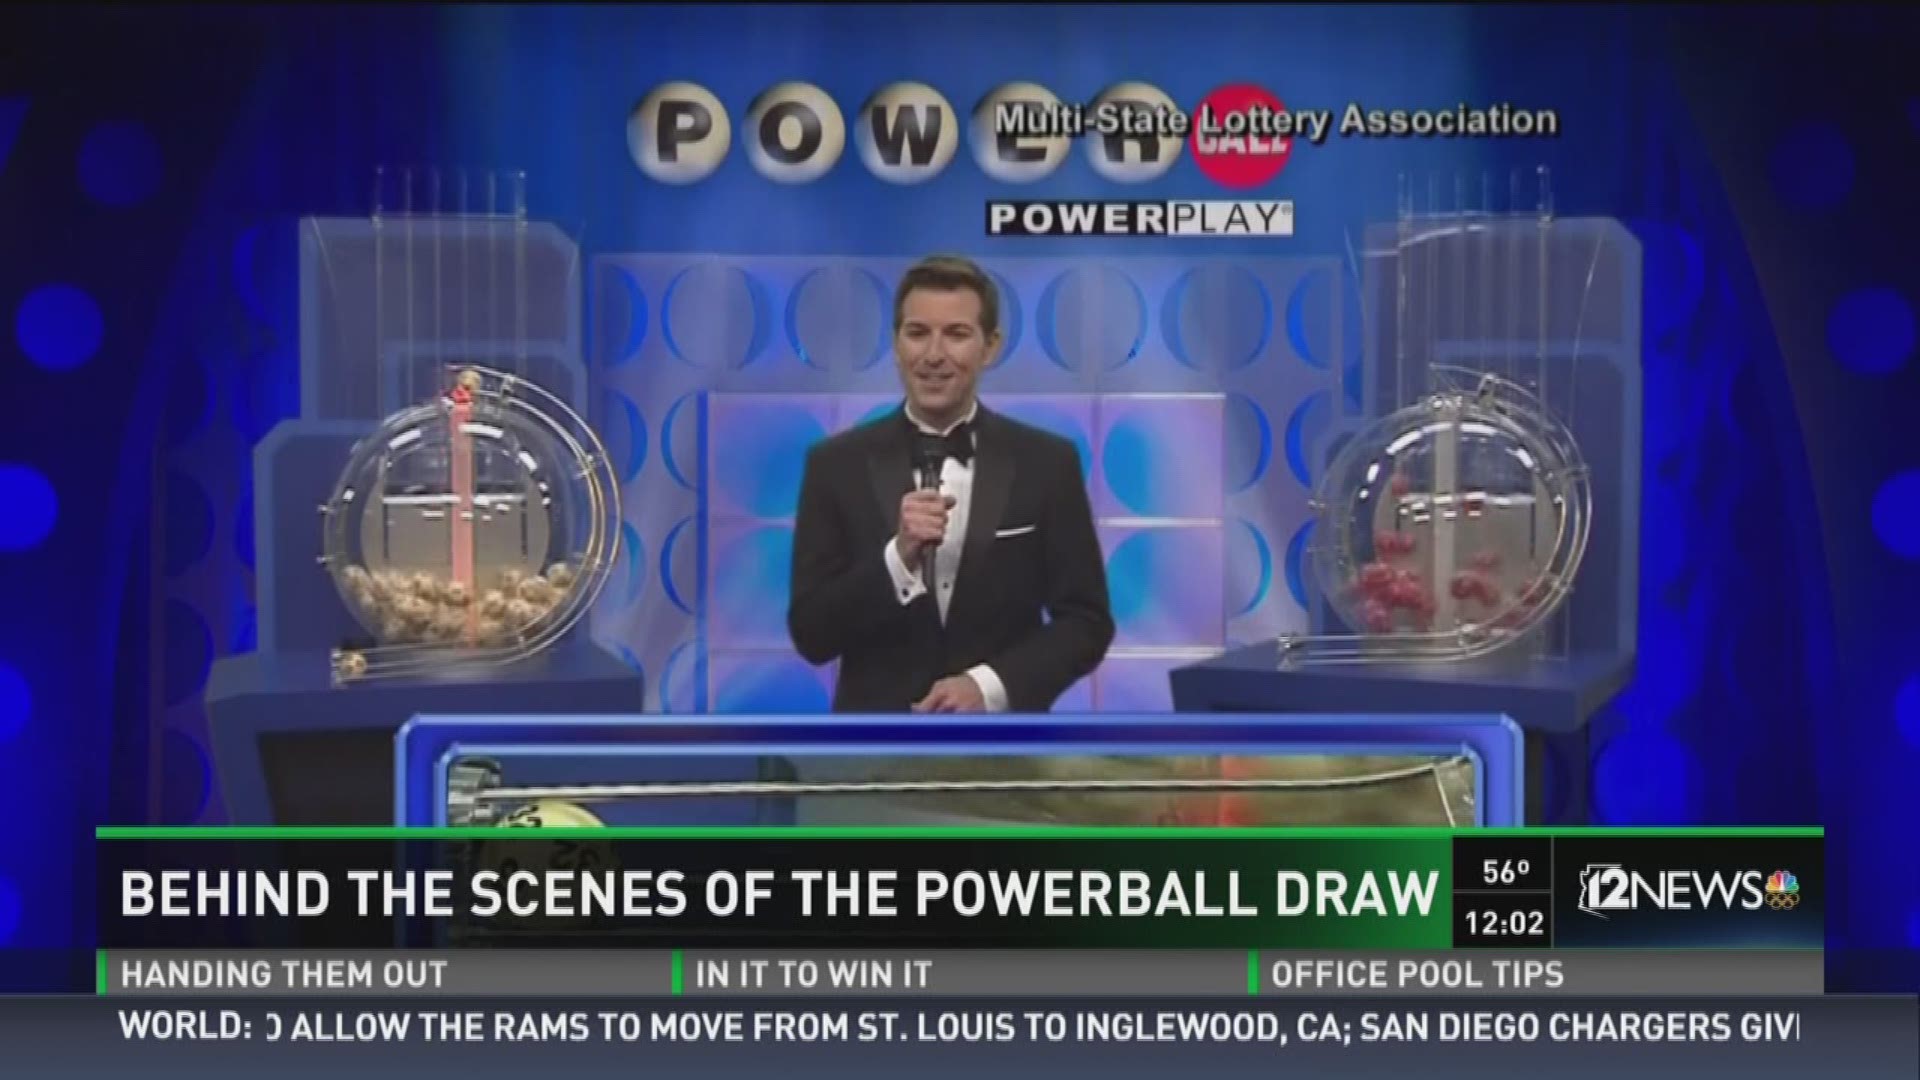 what time is the powerball drawing in arizona Tatyana Brantley